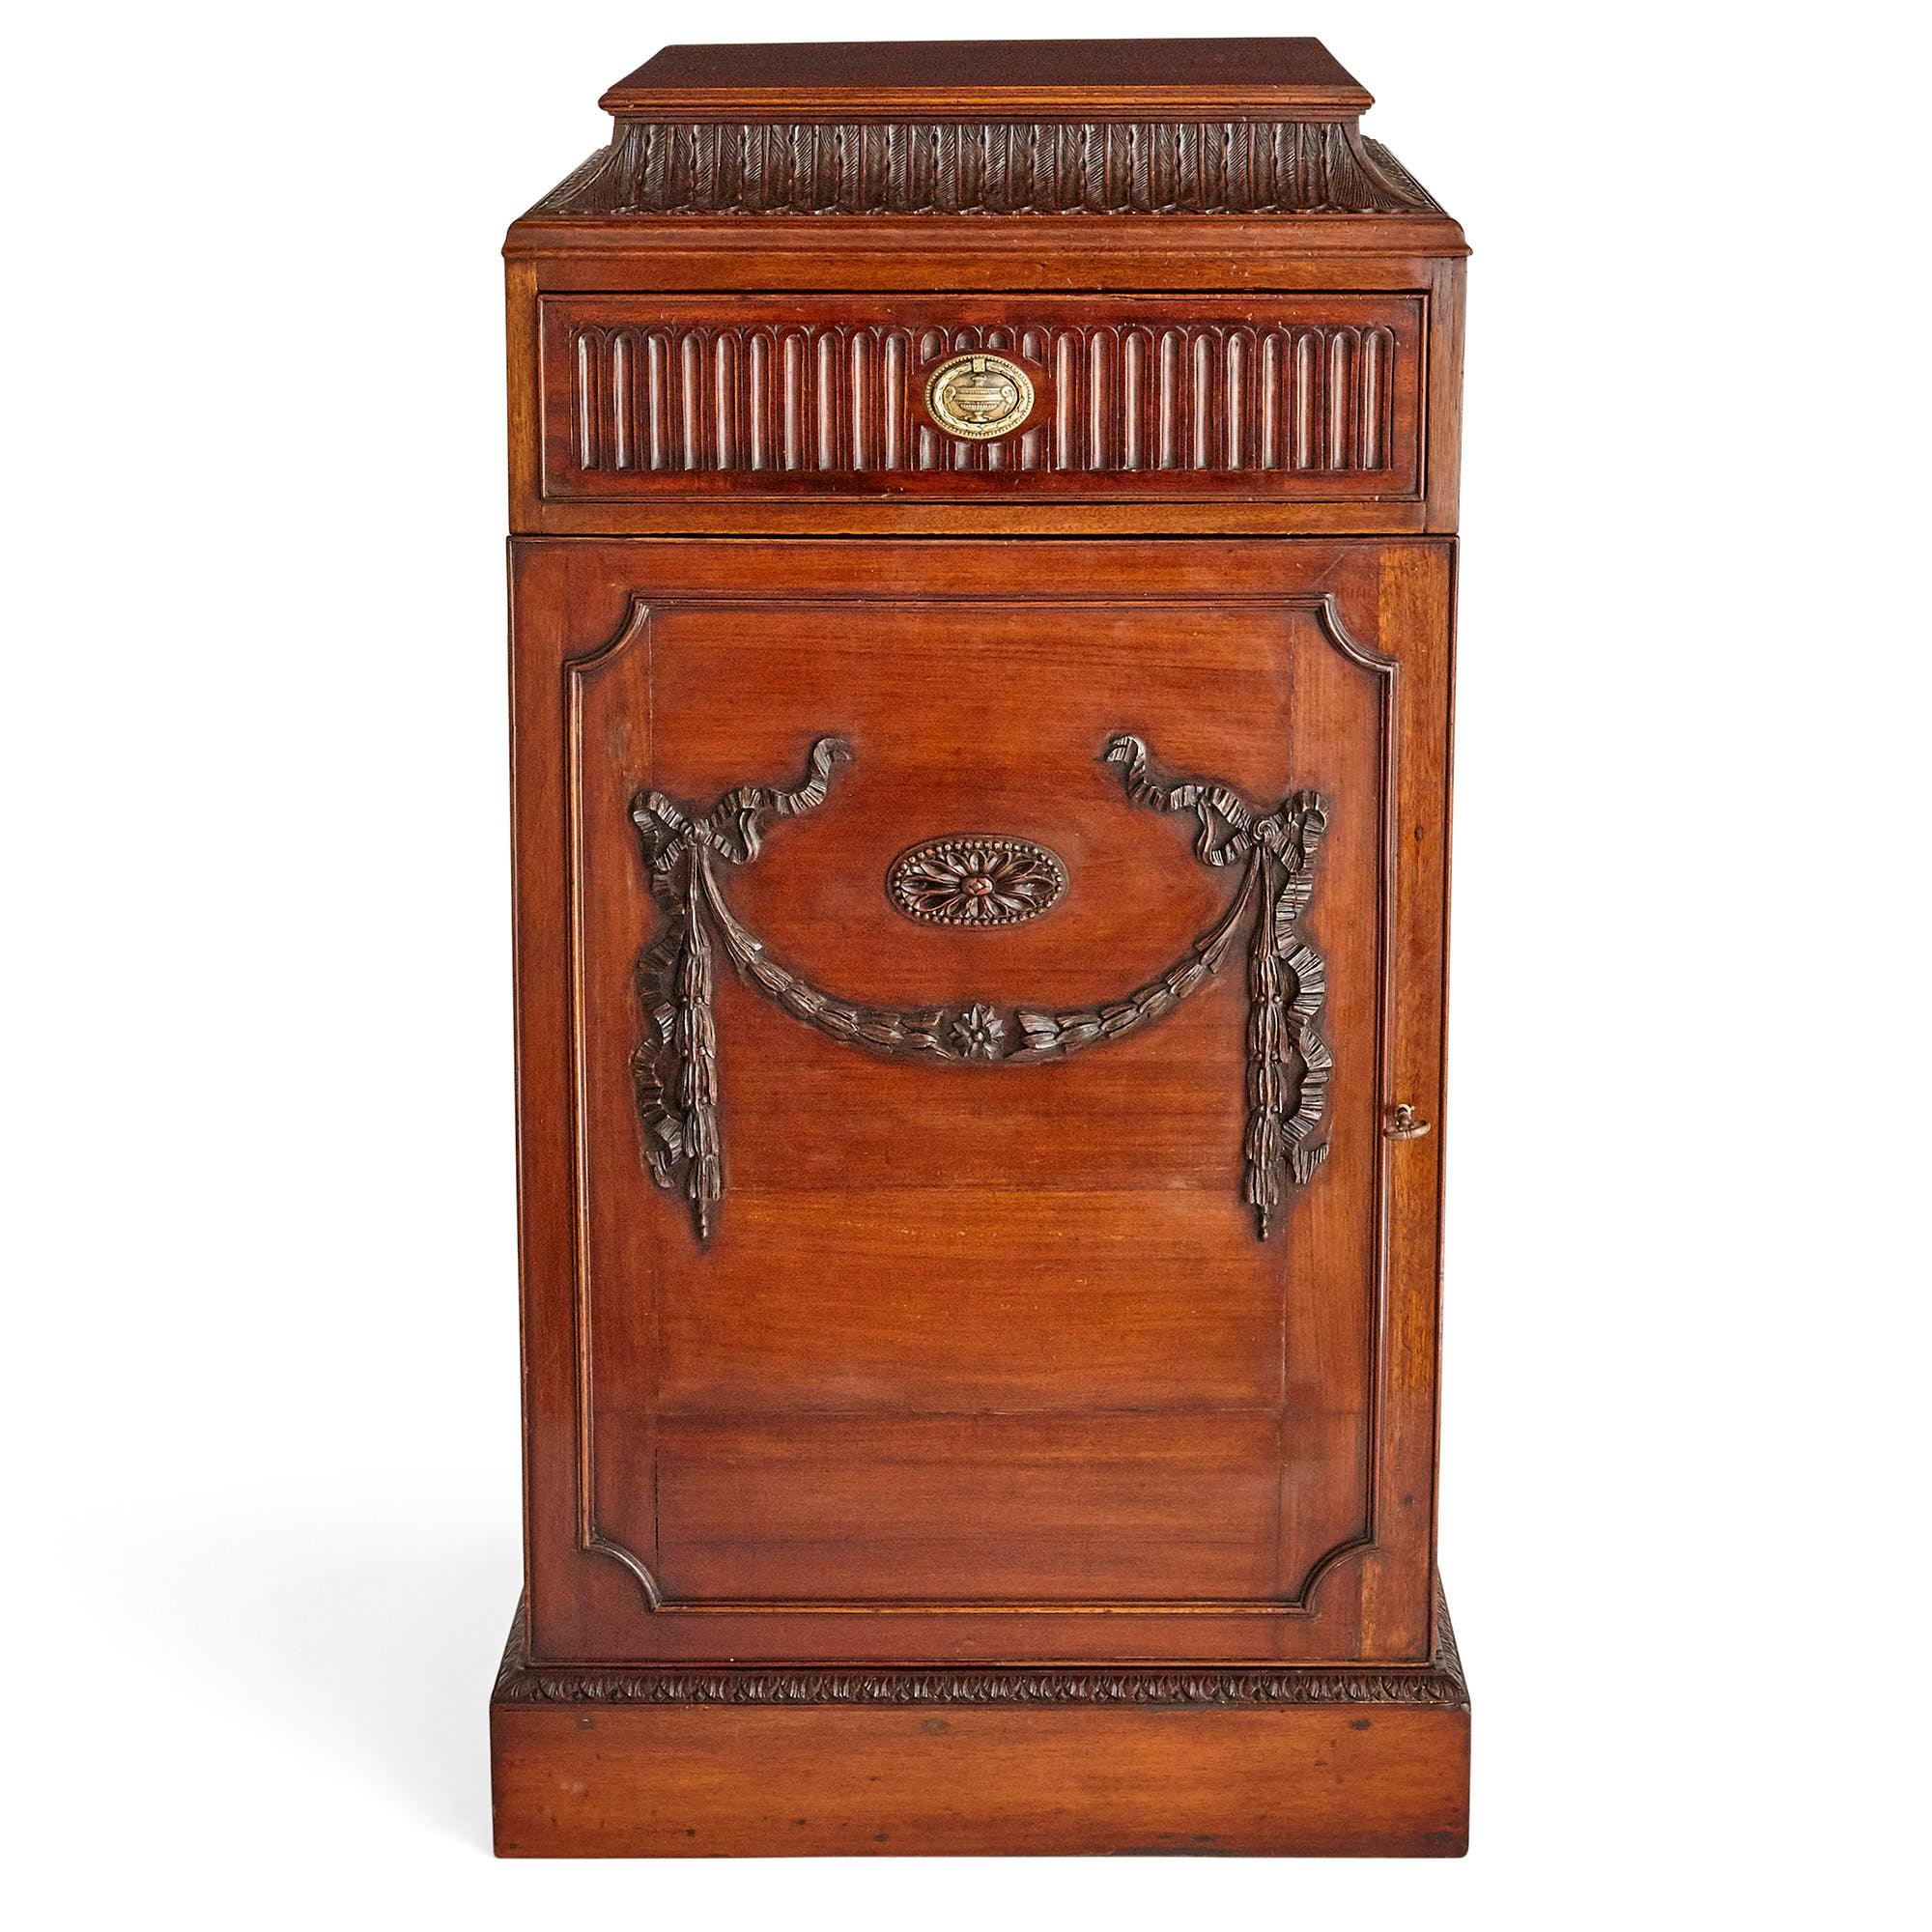 Pair of Georgian style mahogany cabinet stands
English, 19th Century
Height 110cm, width 60cm, depth 55cm

Each mahogany cabinet in this pair is crafted in the style popular during the reign of George III, namely a refined classicism. Each unit,